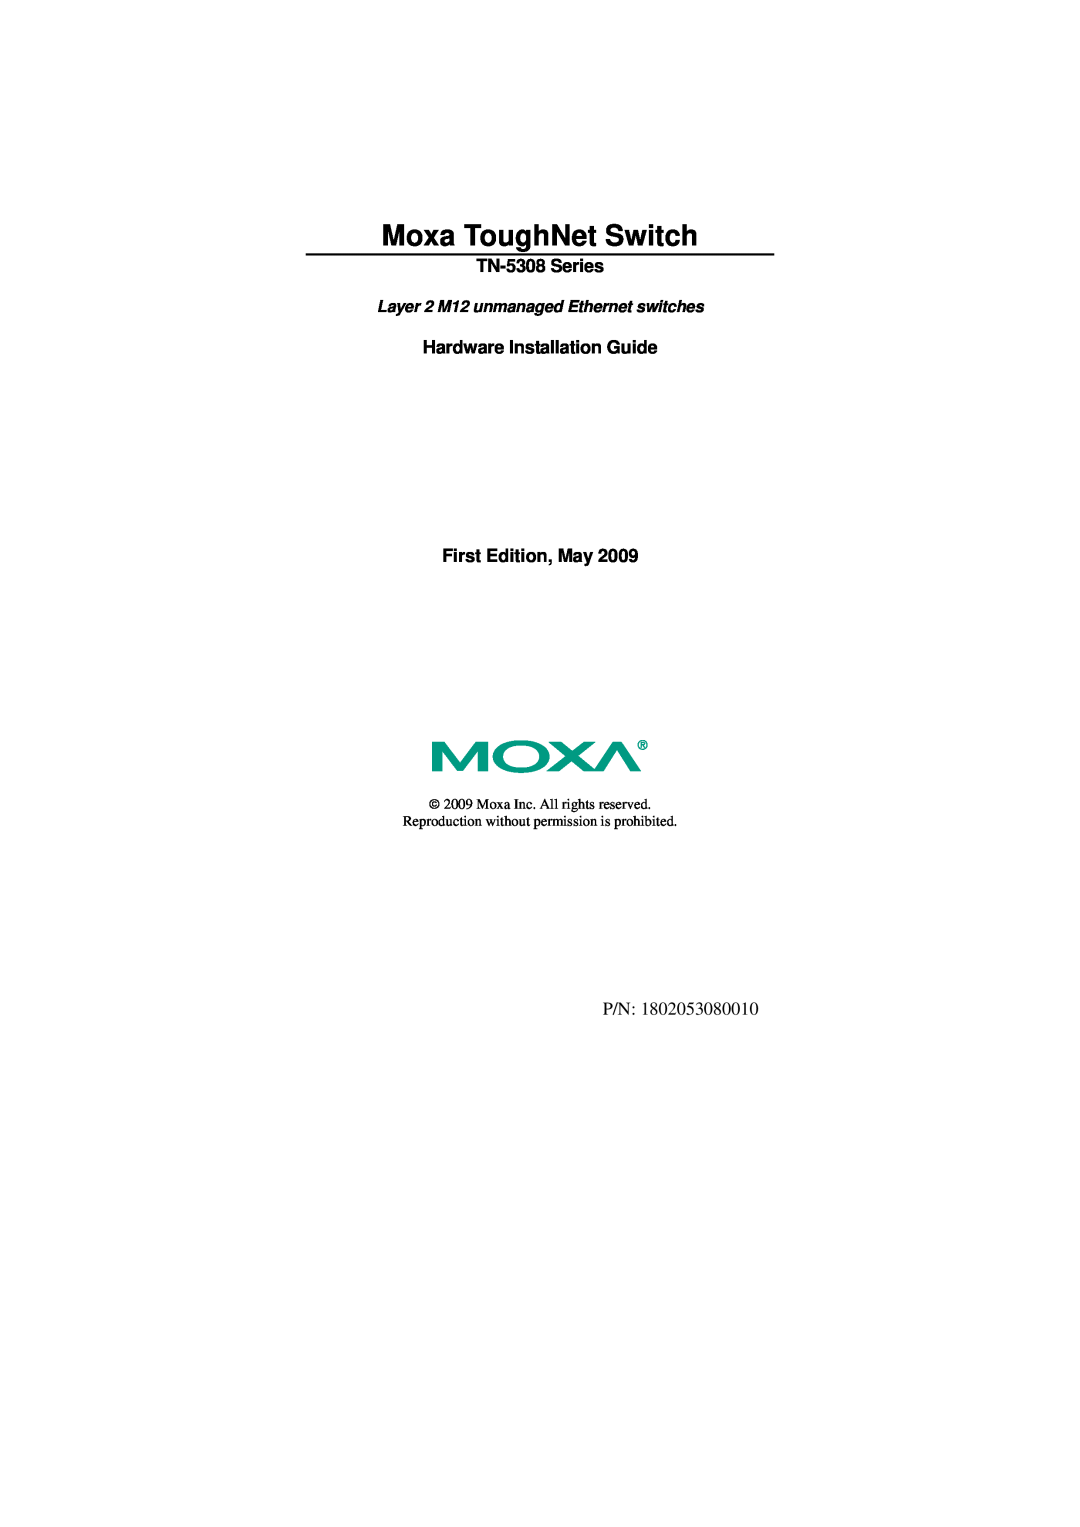 Moxa Technologies manual TN-5308 Series, Hardware Installation Guide First Edition, May, Moxa ToughNet Switch 